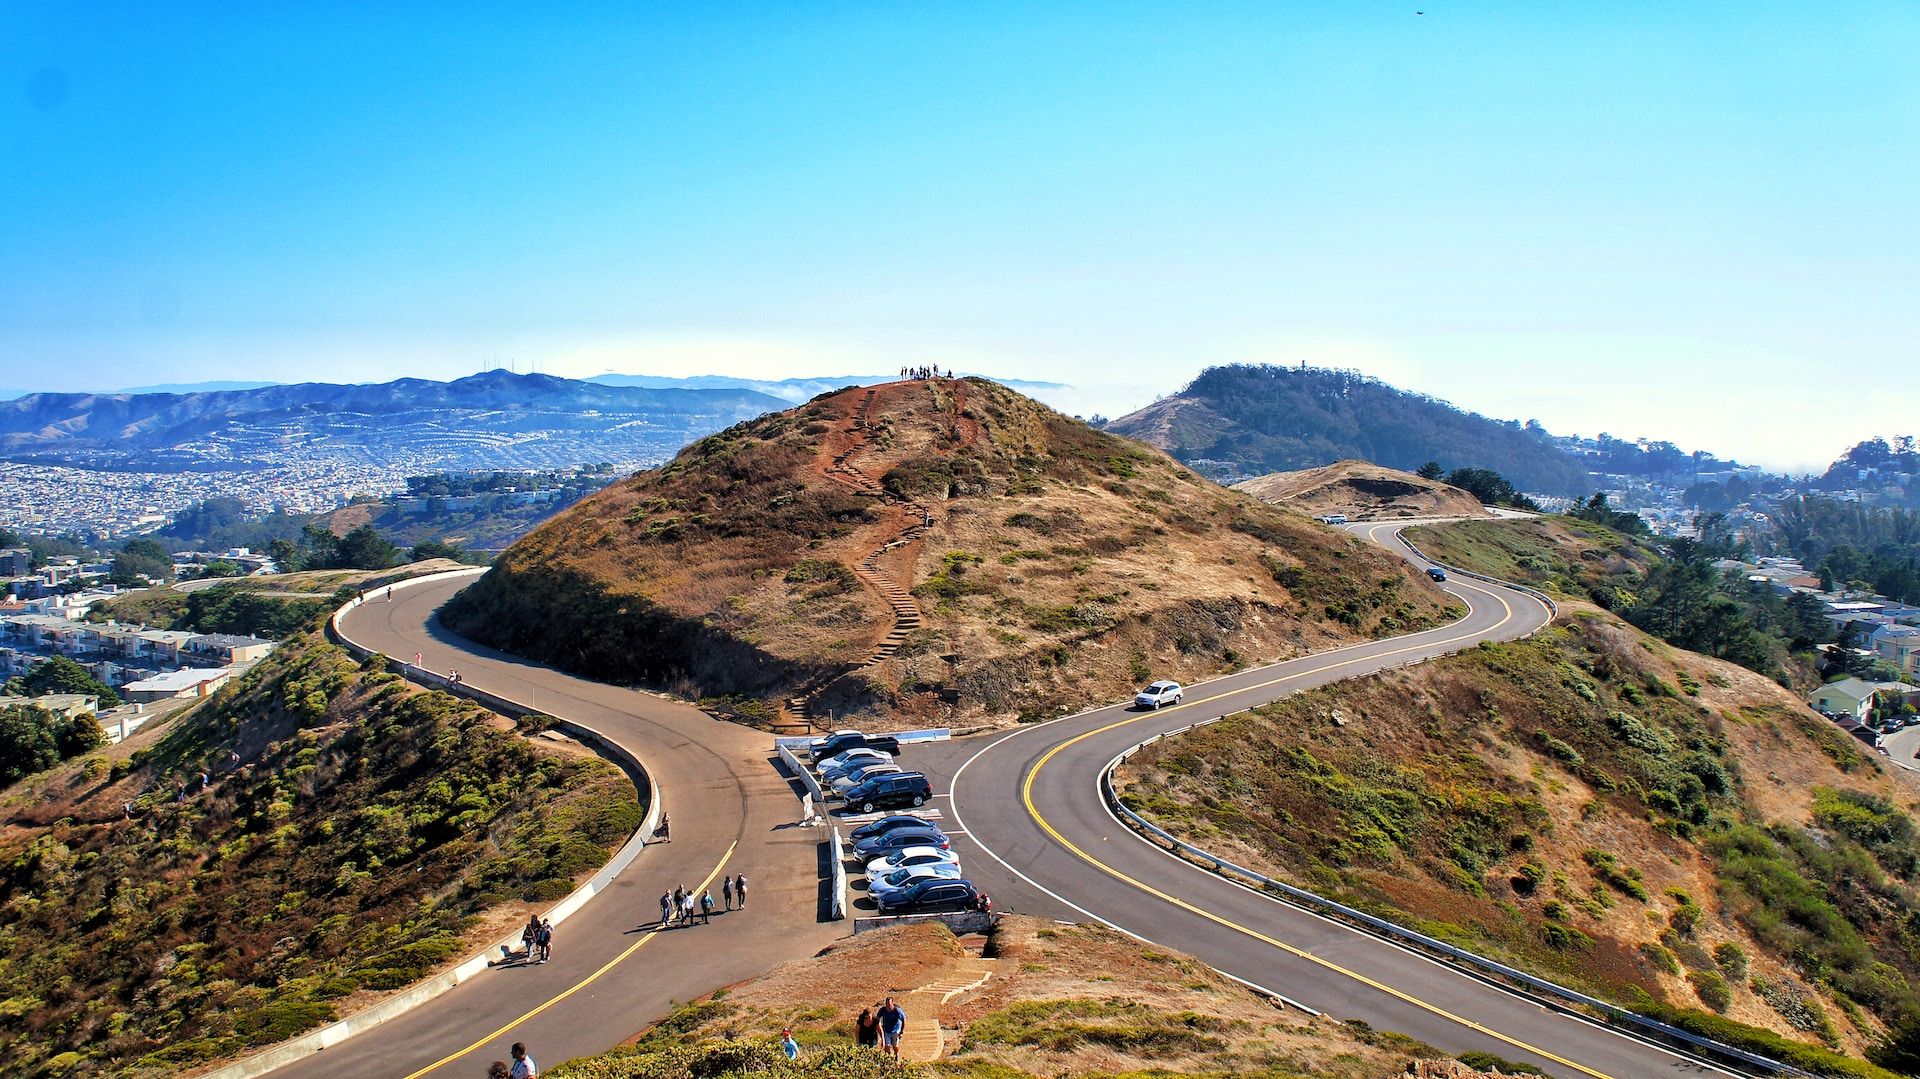 View of one of two hills at Twin Peaks and parked cars, San Francisco, California 